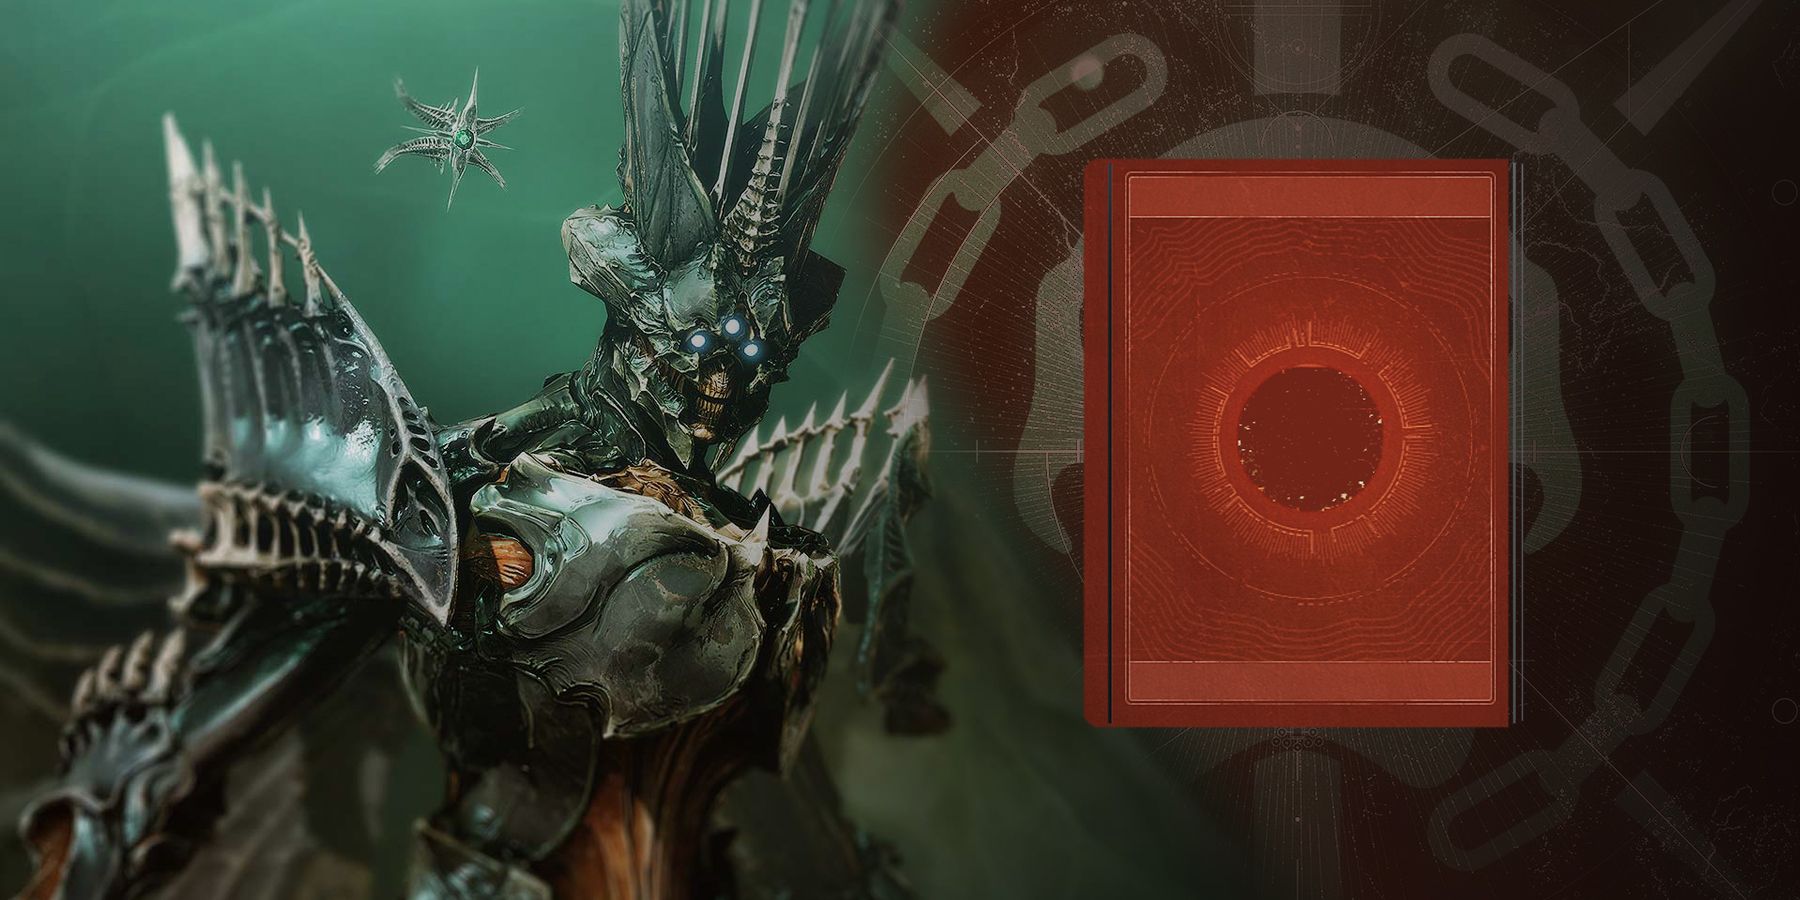 Savathun with the Martian Missives lore book from The Witch Queen in Destiny 2.